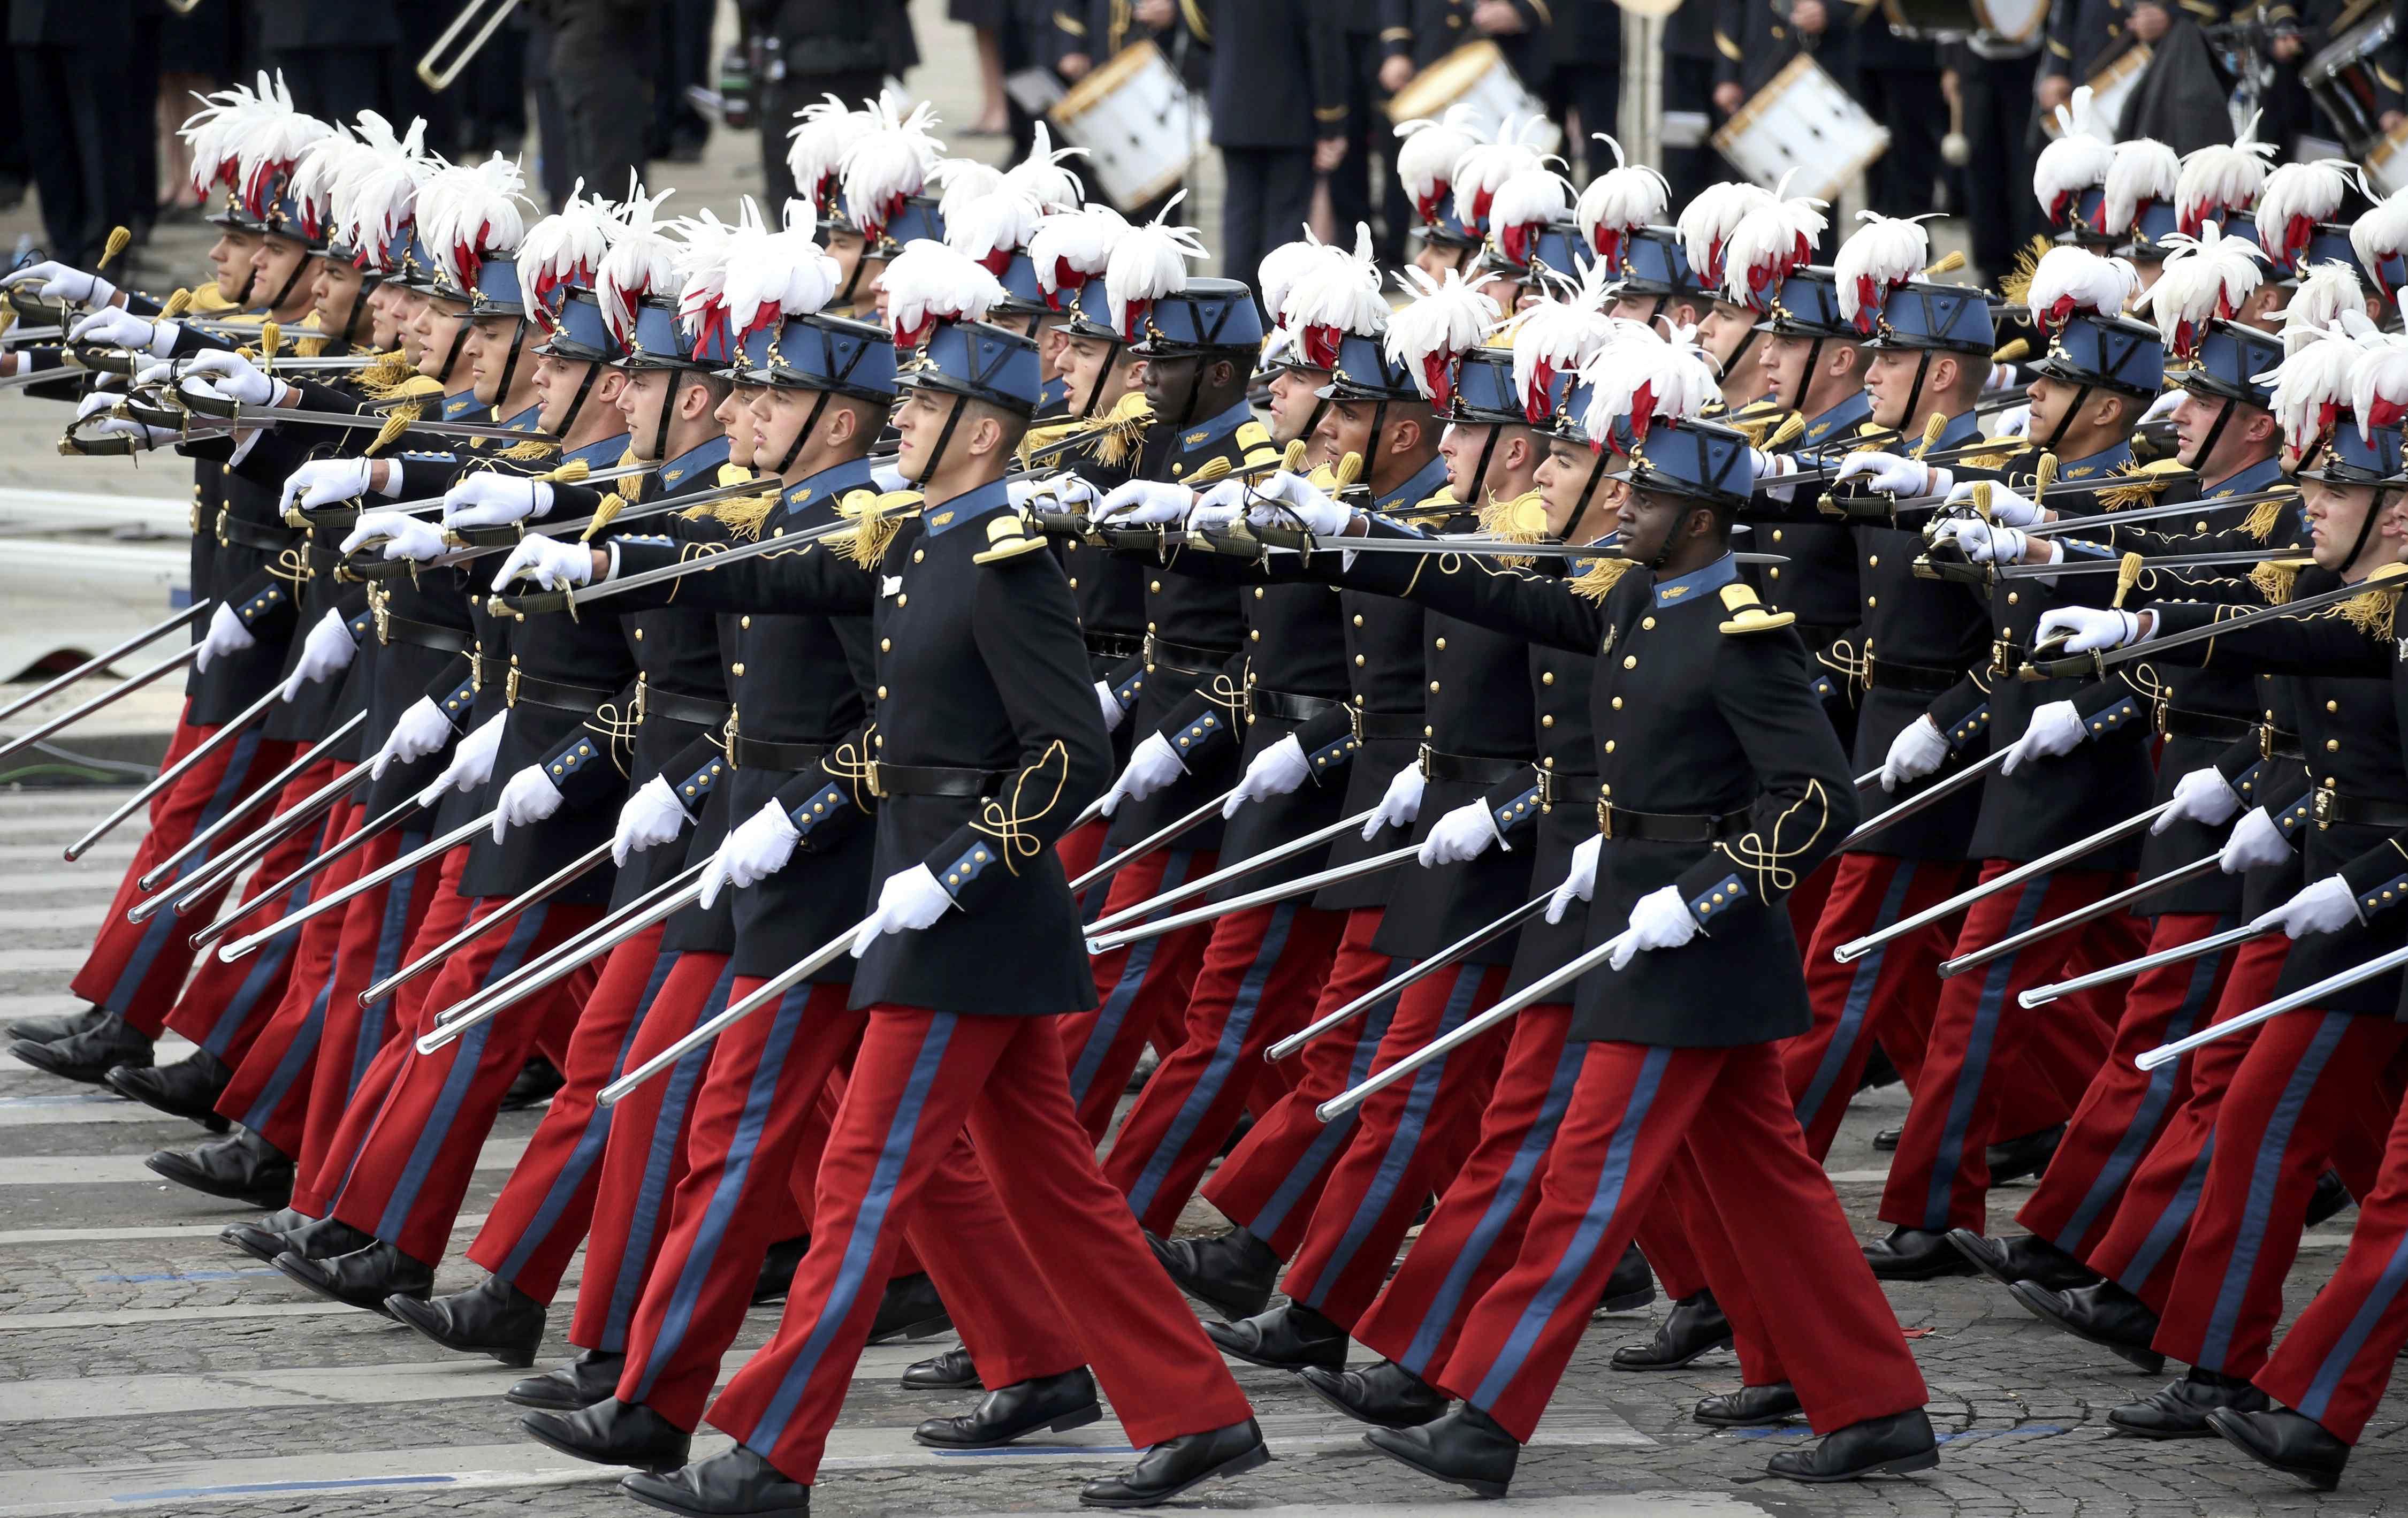 Students of the special military school of Saint-Cyr march during the traditional Bastille Day milit